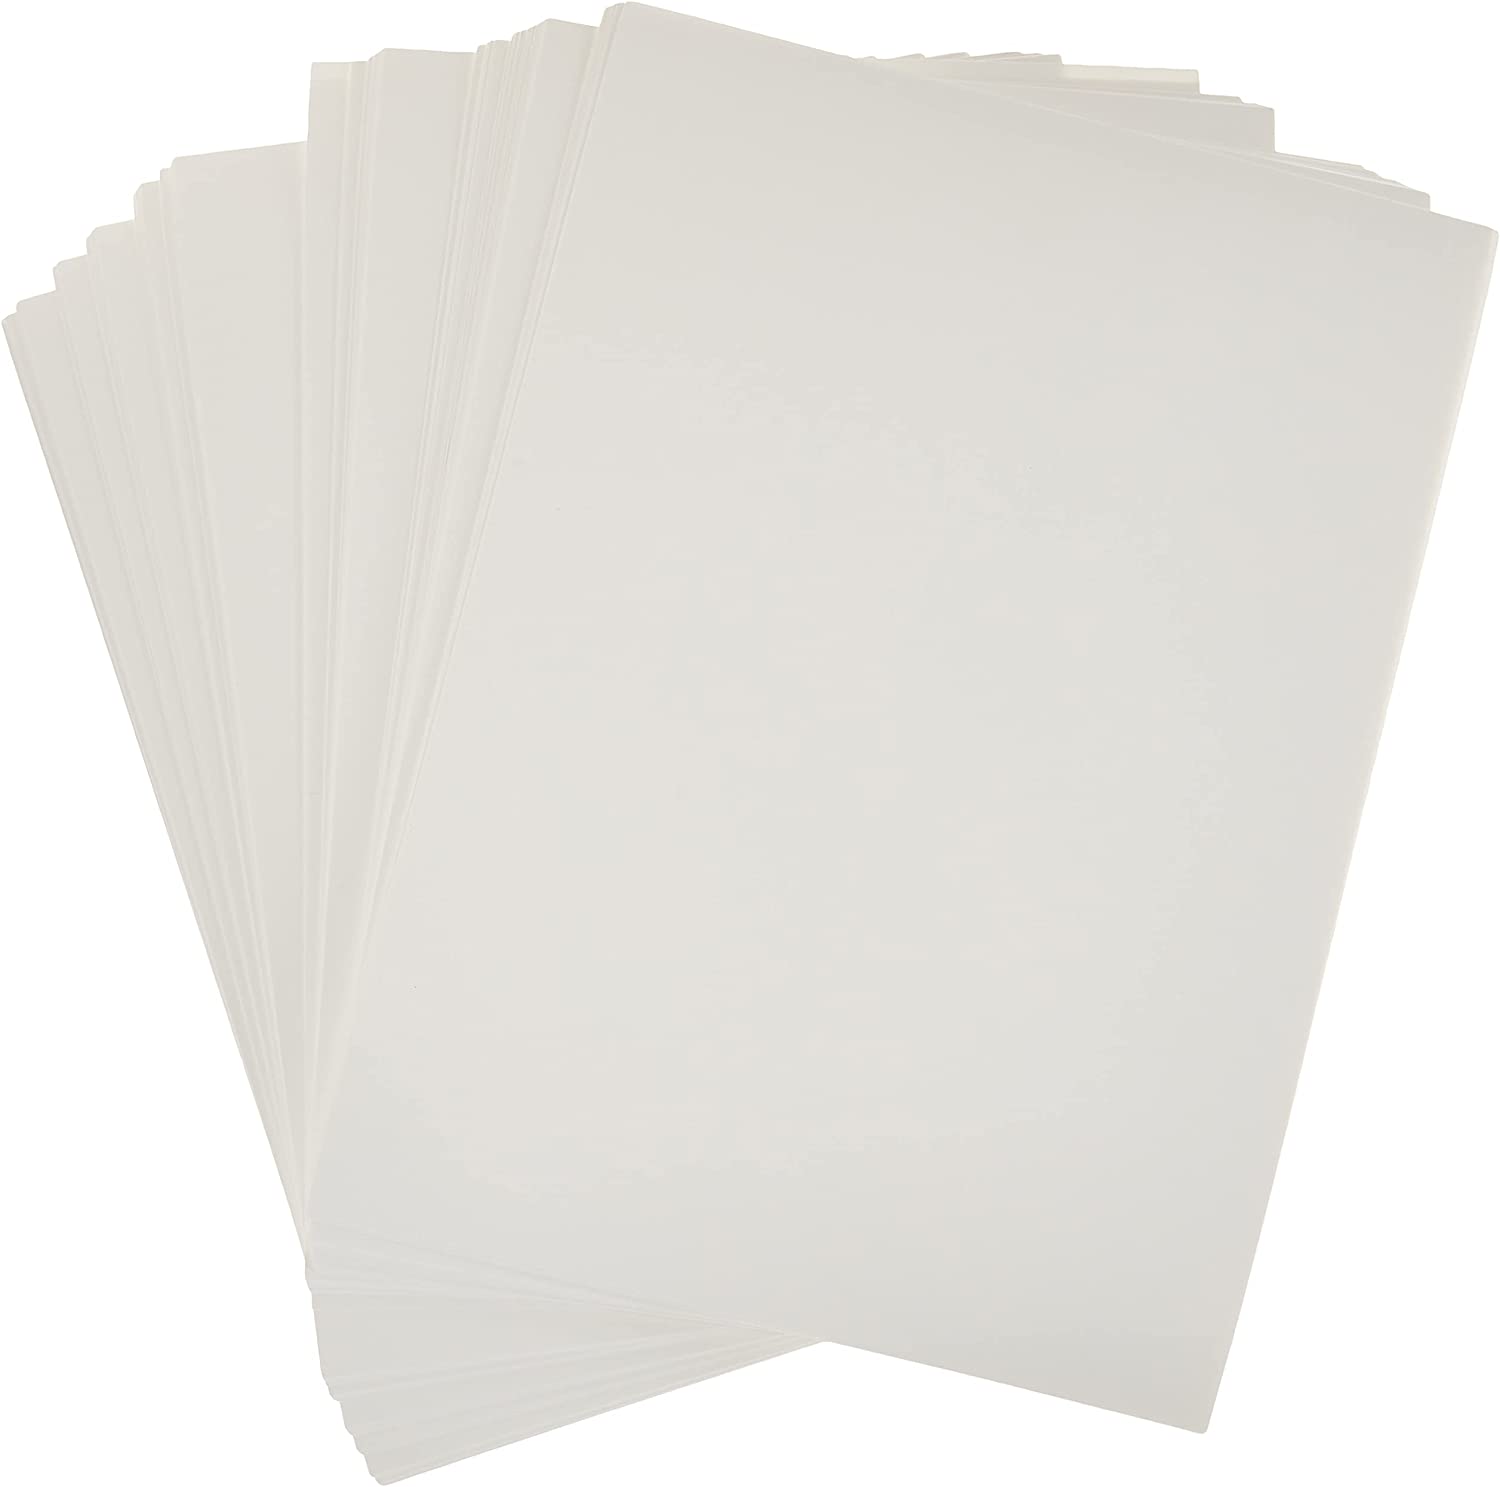 Canson Watercolor Bulk Paper Pack, For Wet and Dry Media, 90 Pound, 11 x 15 Inch, 100 Sheets